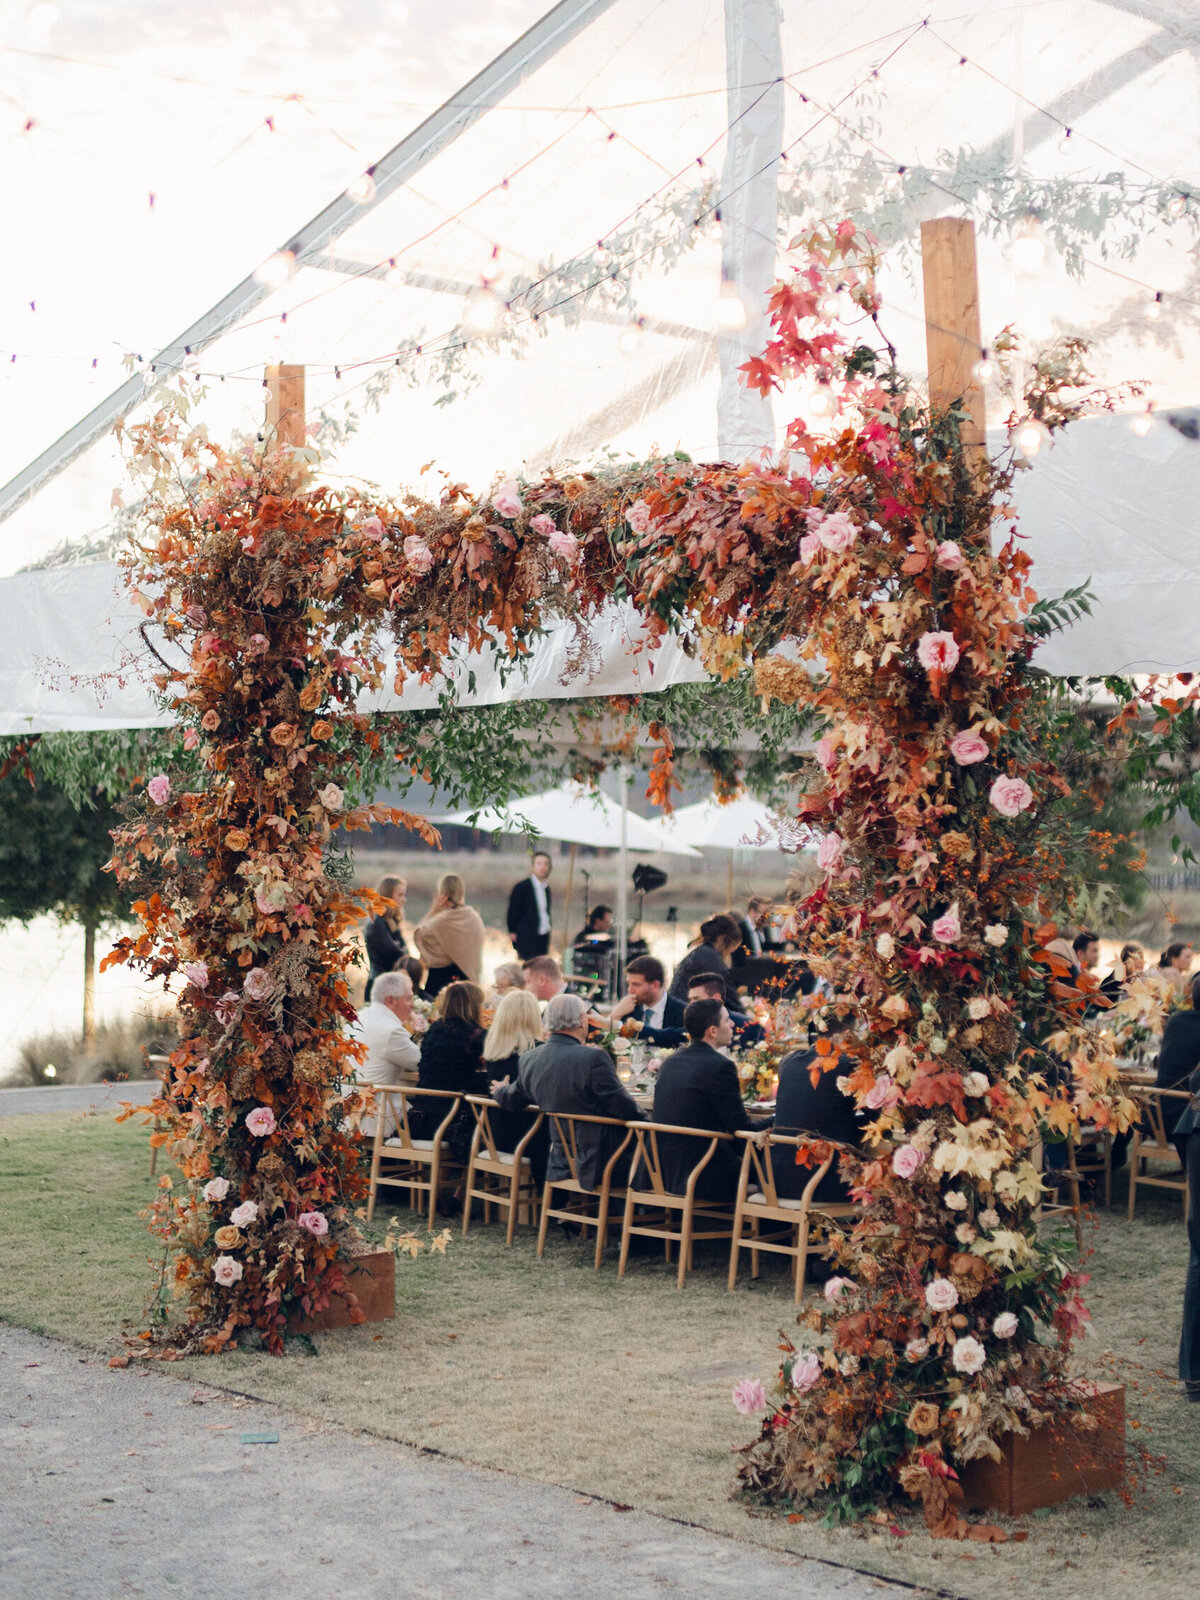 Tent entrance installation for fall wedding at Southall Farm & Inn. Lush floral install makes large impact in blush, tangerine, caramel, and mustard yellow flower colors. Large fall branches and roses make a statement for this wedding reception tent entrance. Destination floral design wedding outside Nashville, TN. Design by Rosemary & Finch Floral Design in Nashville, TN.